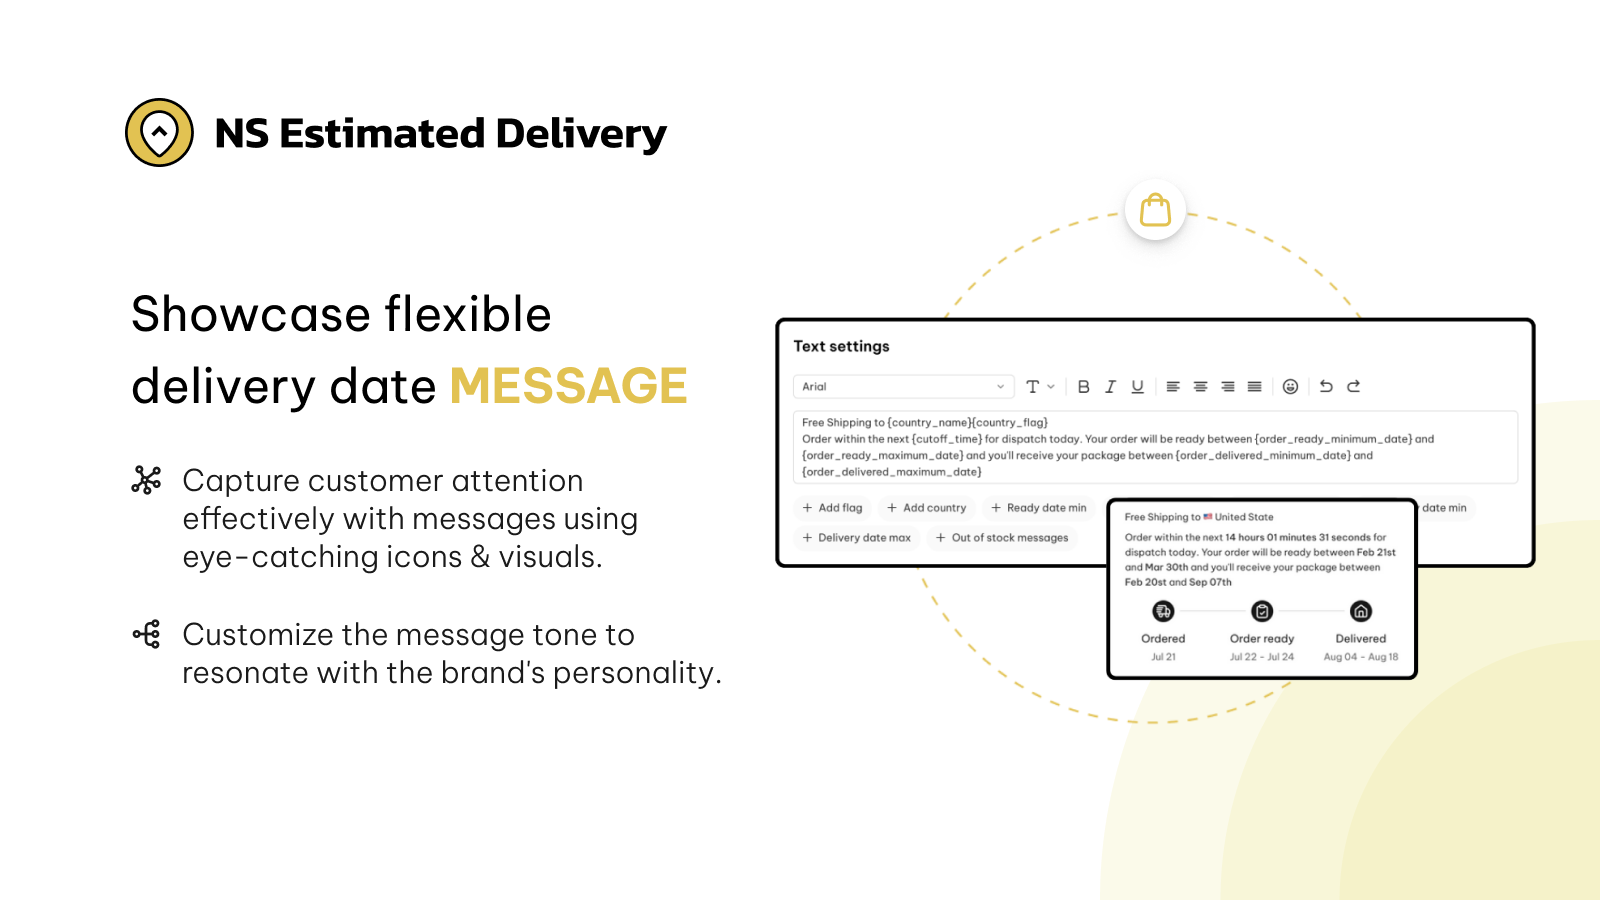 Showcase flexible delivery date message